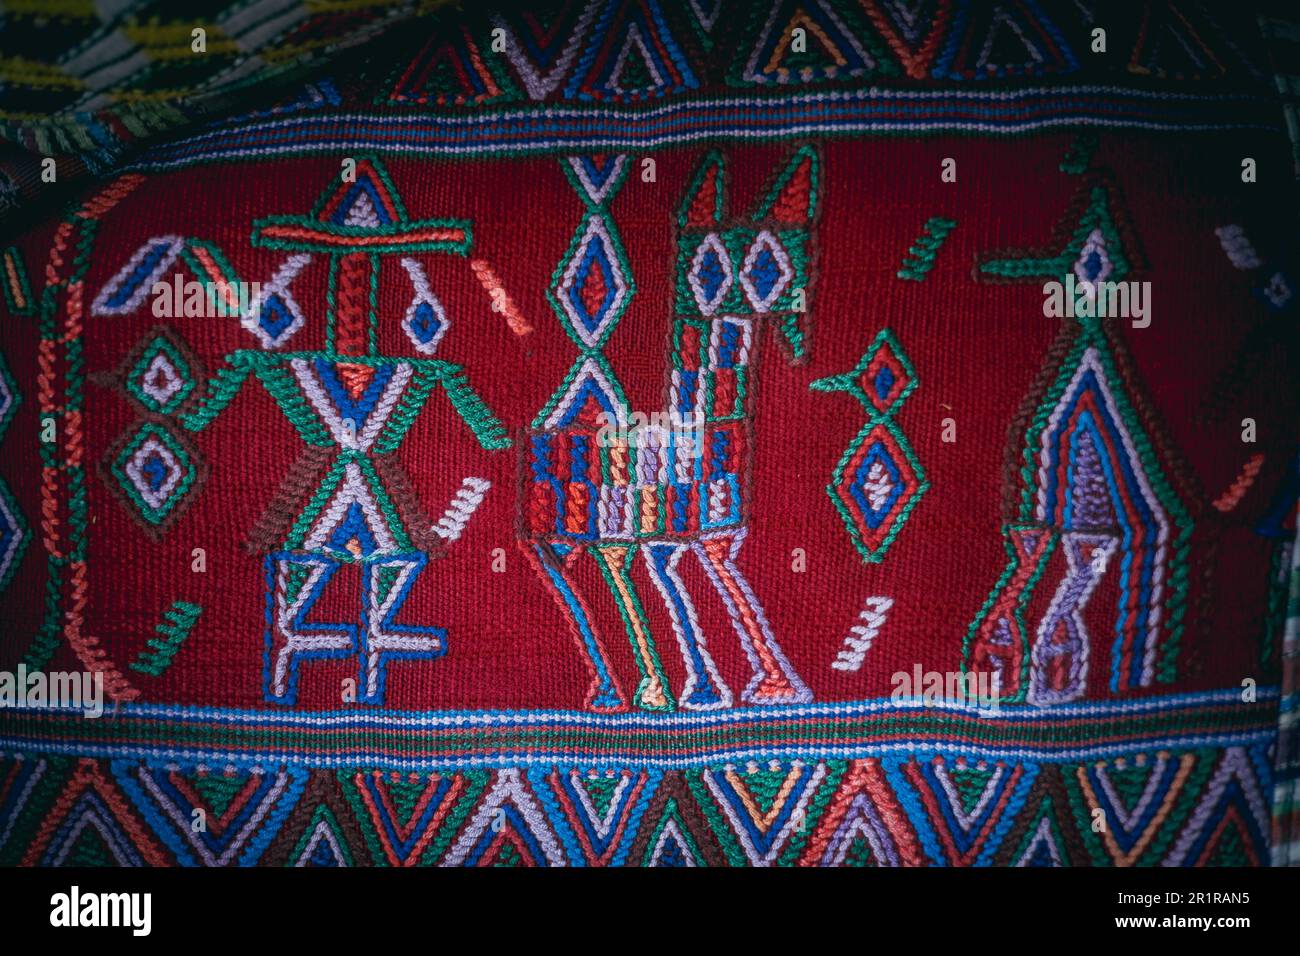 A vibrant, multi-hued rug with intricate geometric shapes and designs Stock Photo